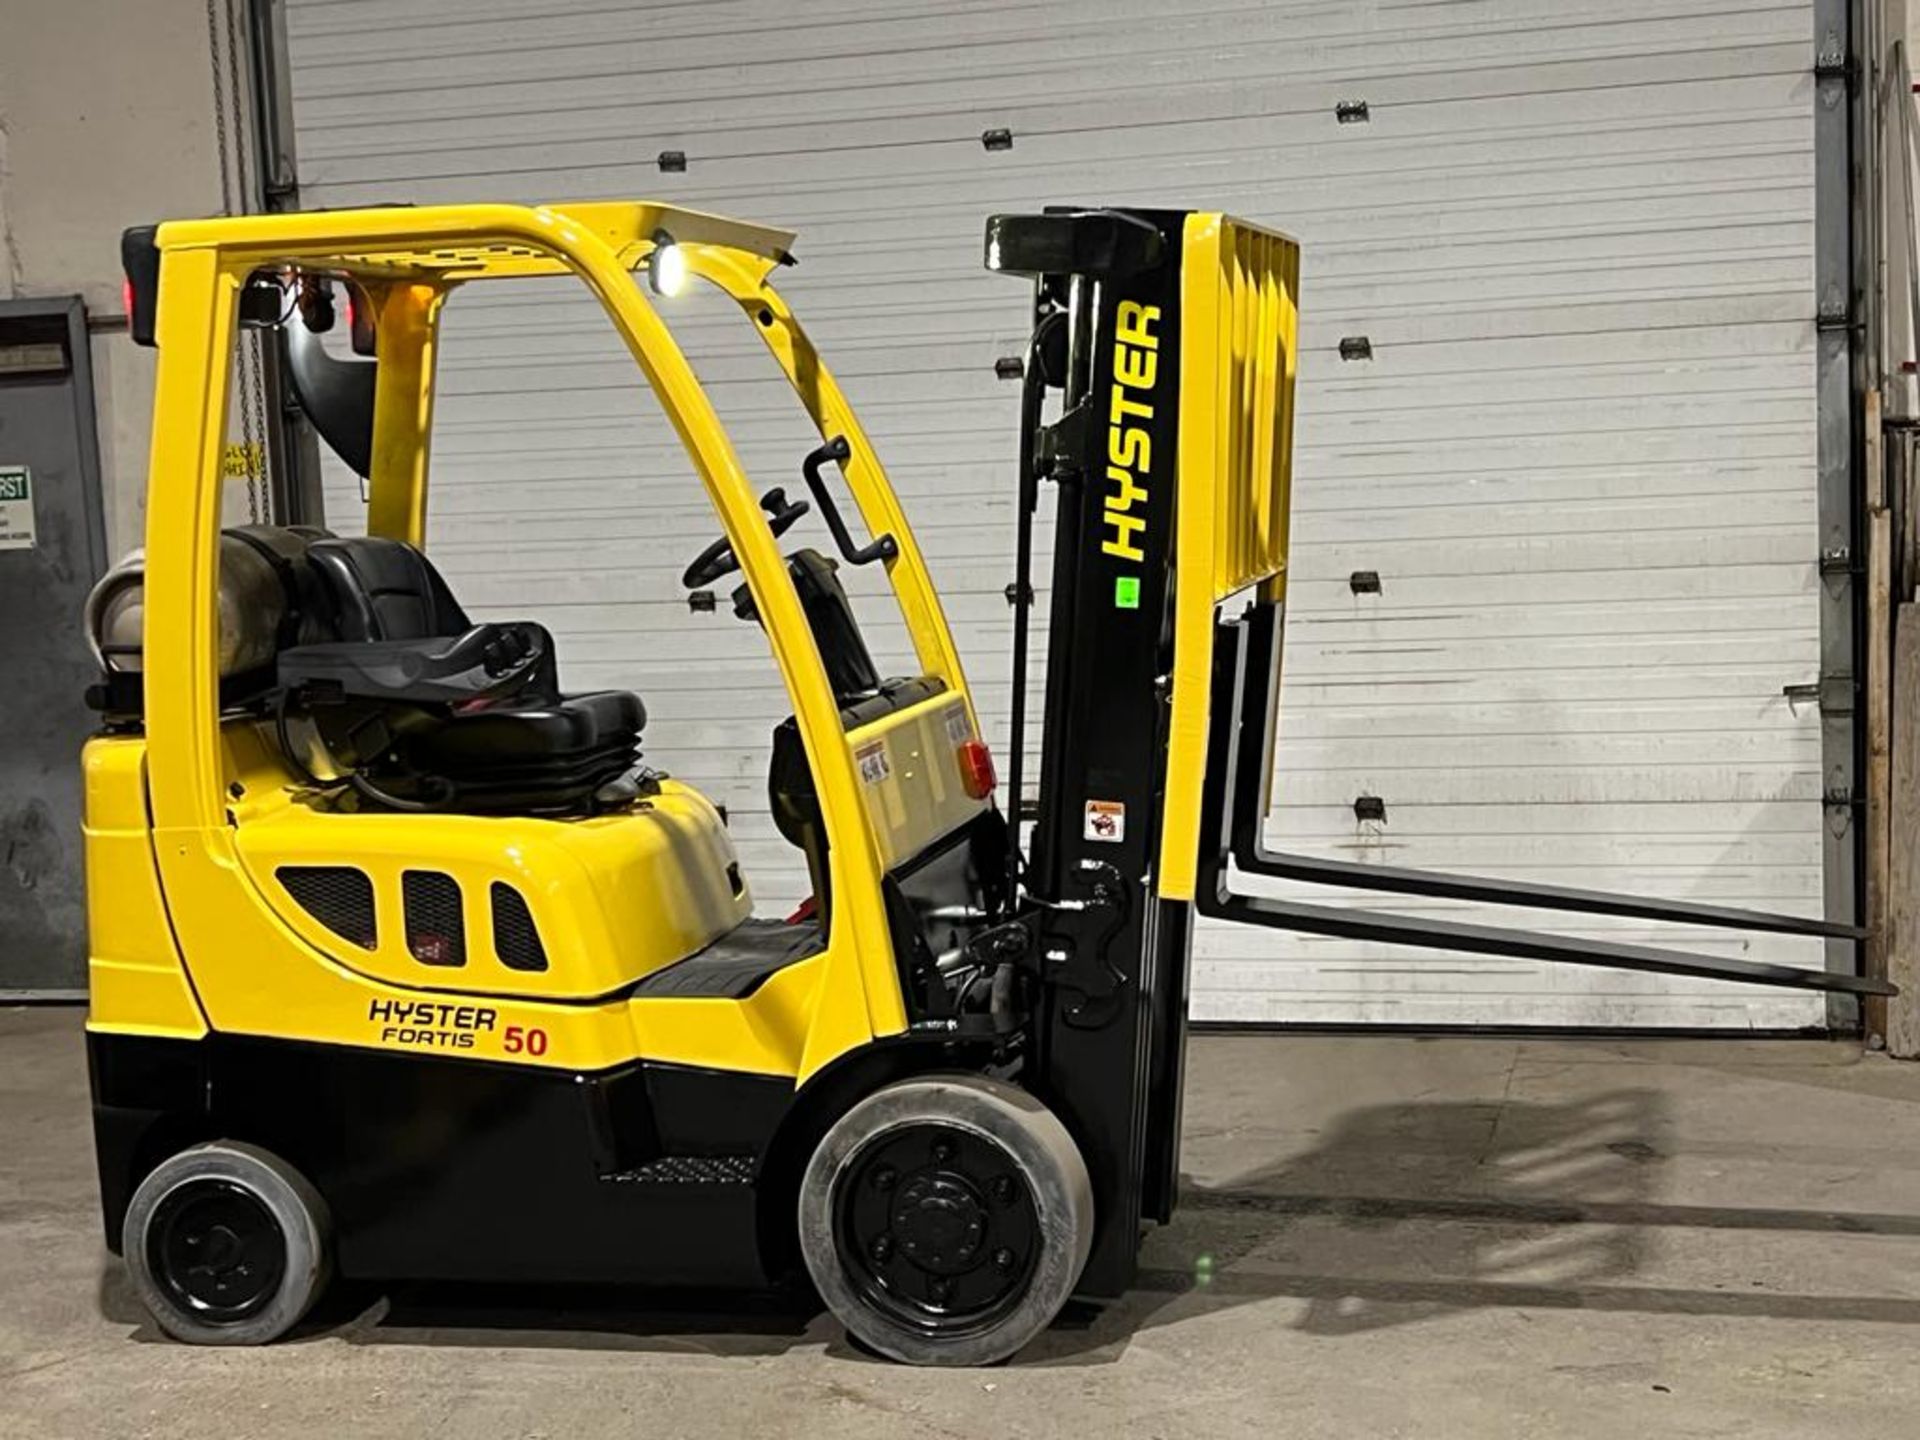 2014 Hyster 5,000lbs Forklift LPG (propane powered) with Sideshift and 3-stage Mast (no propane tank